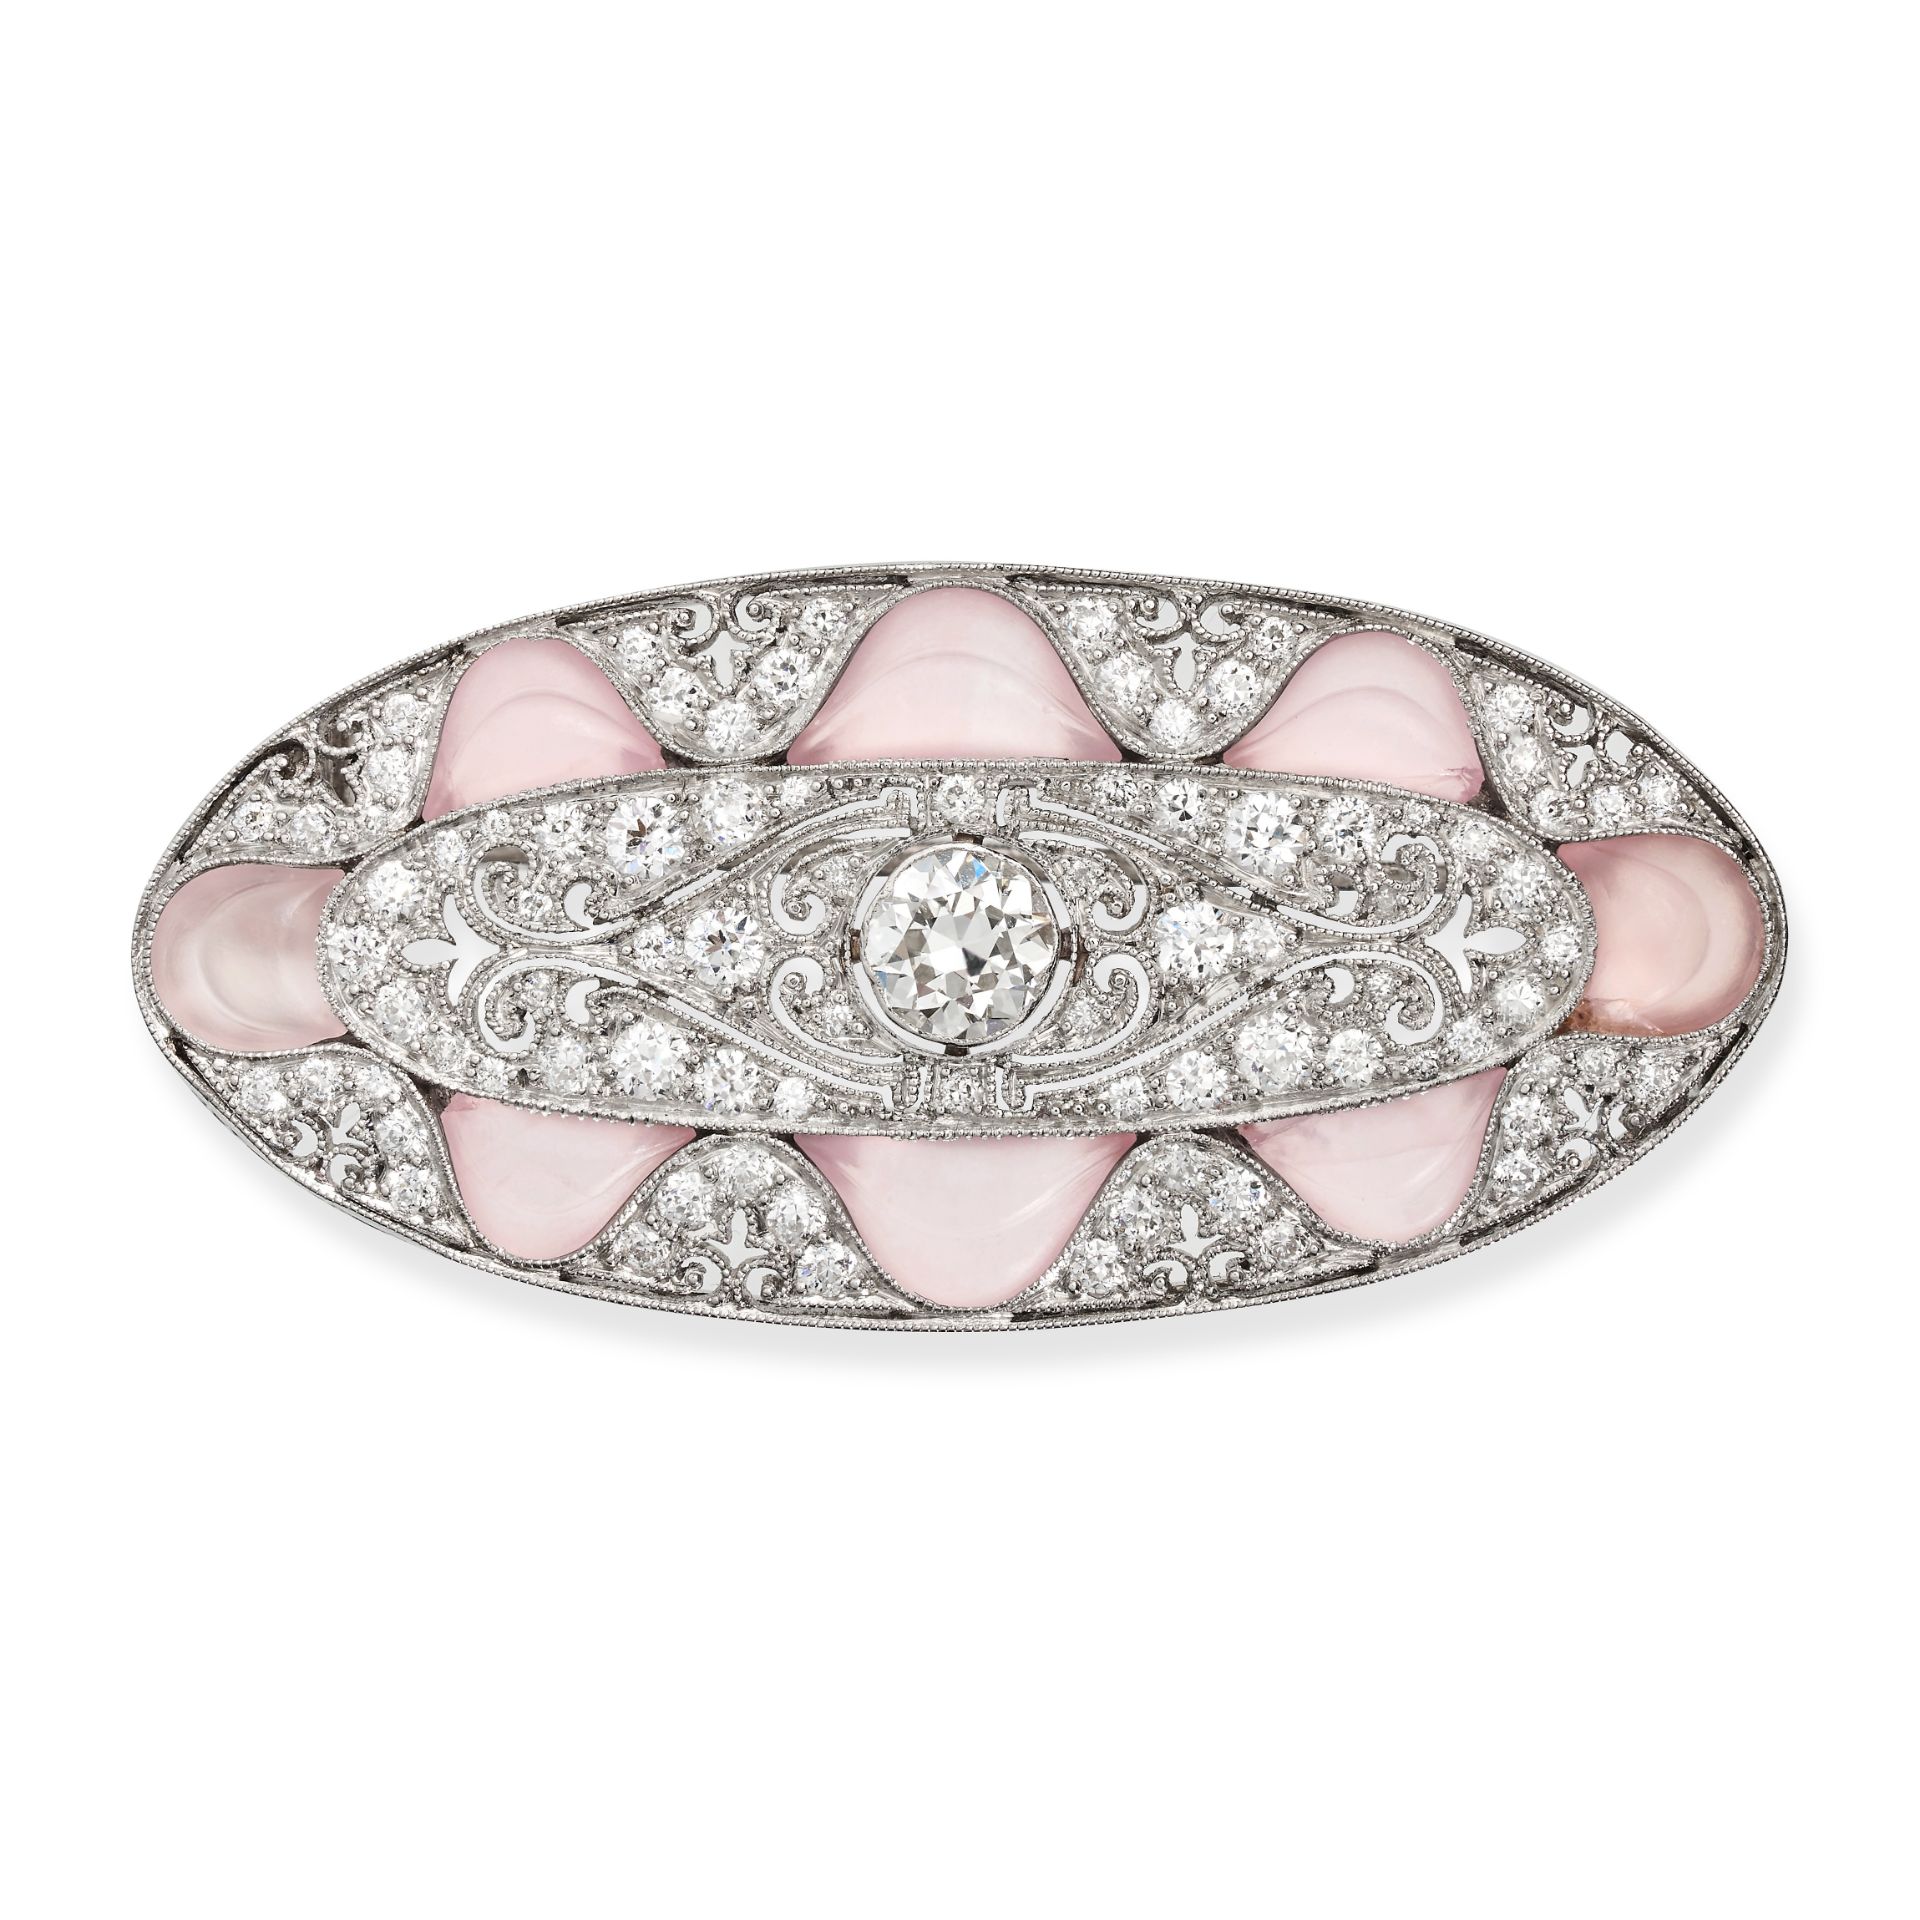 TIFFANY & CO., AN EXQUISITE ART DECO ROCK CRYSTAL AND DIAMOND BROOCH in platinum, the oval brooch...